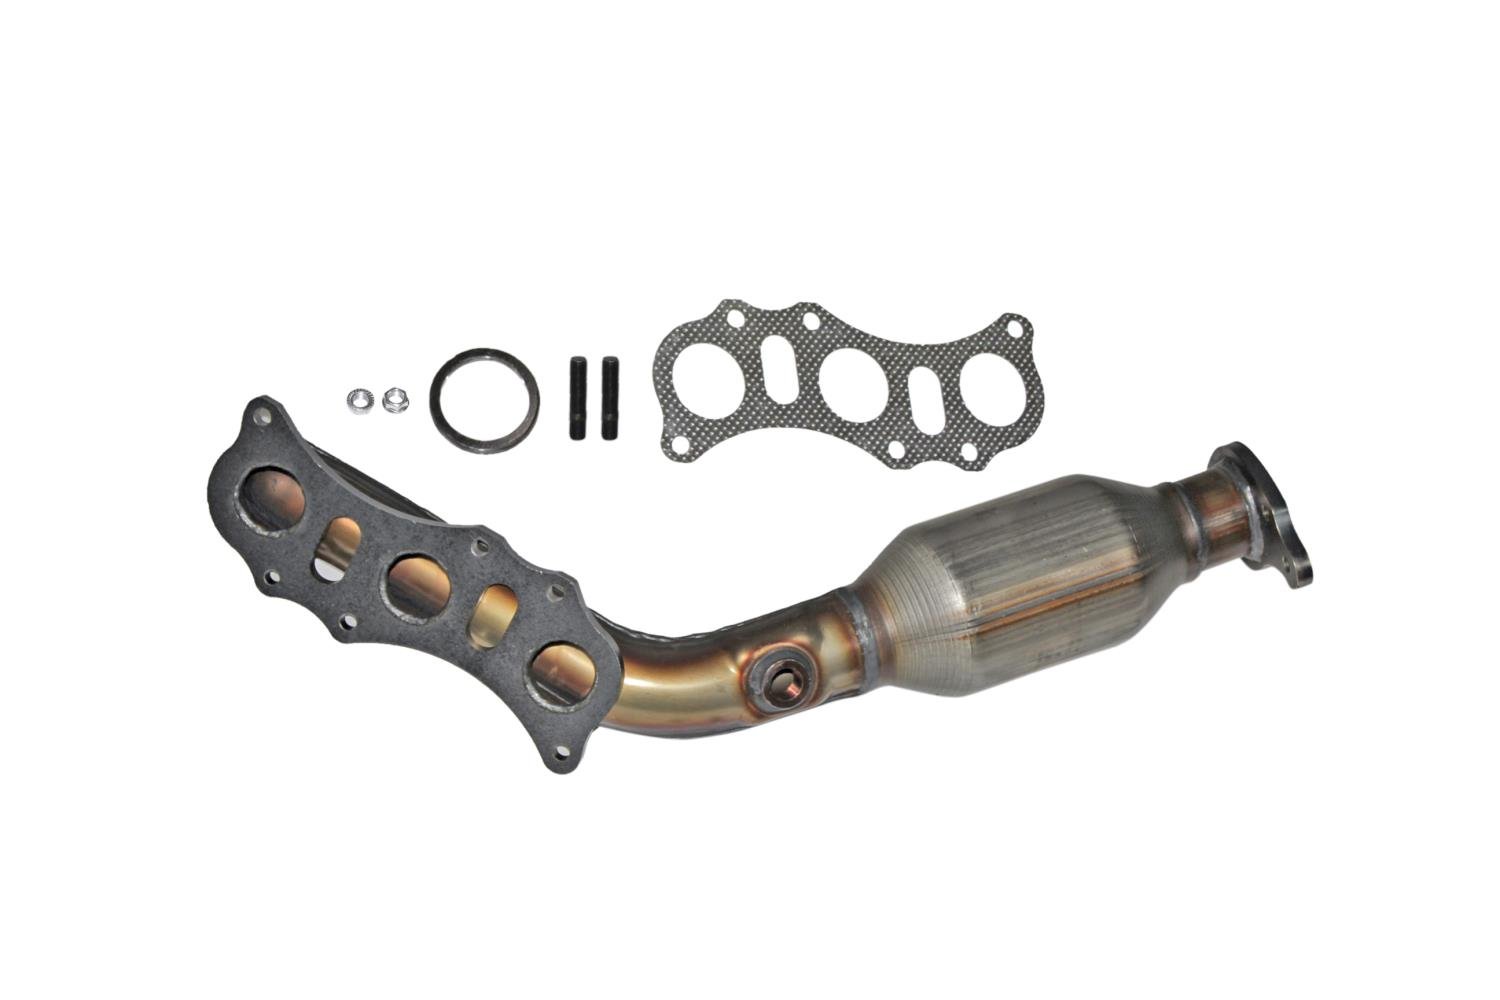 Catalytic Converter Fits Select 2003-2011 Toyota 4Runner, FJ Cruiser, Tacoma, Tundra Models w/4.0L V6 Eng. [Front Right]